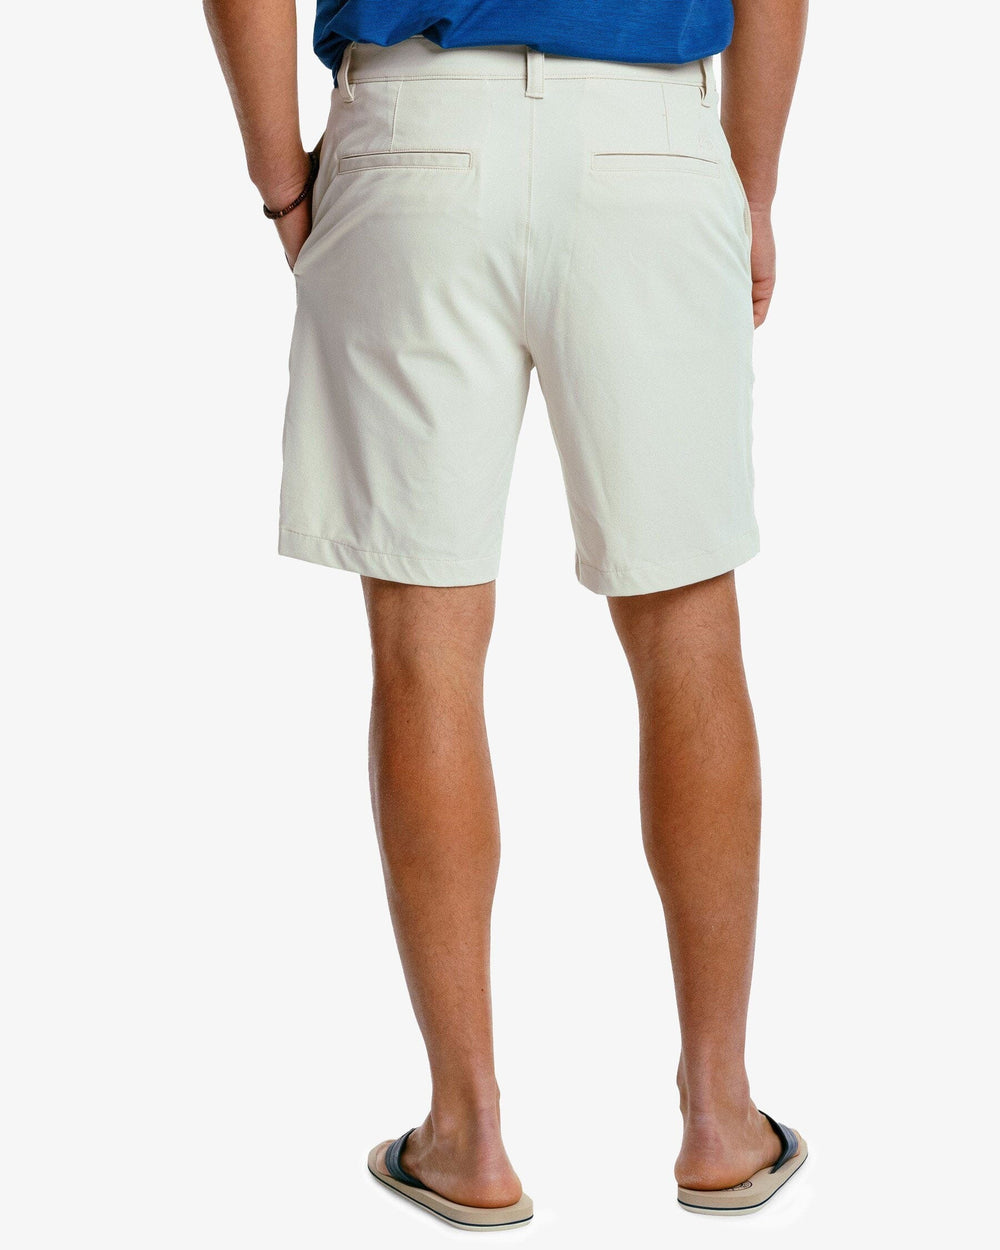 The back of the Men's Gulf 8 Inch Brrr Performance Short by Southern Tide - Stone